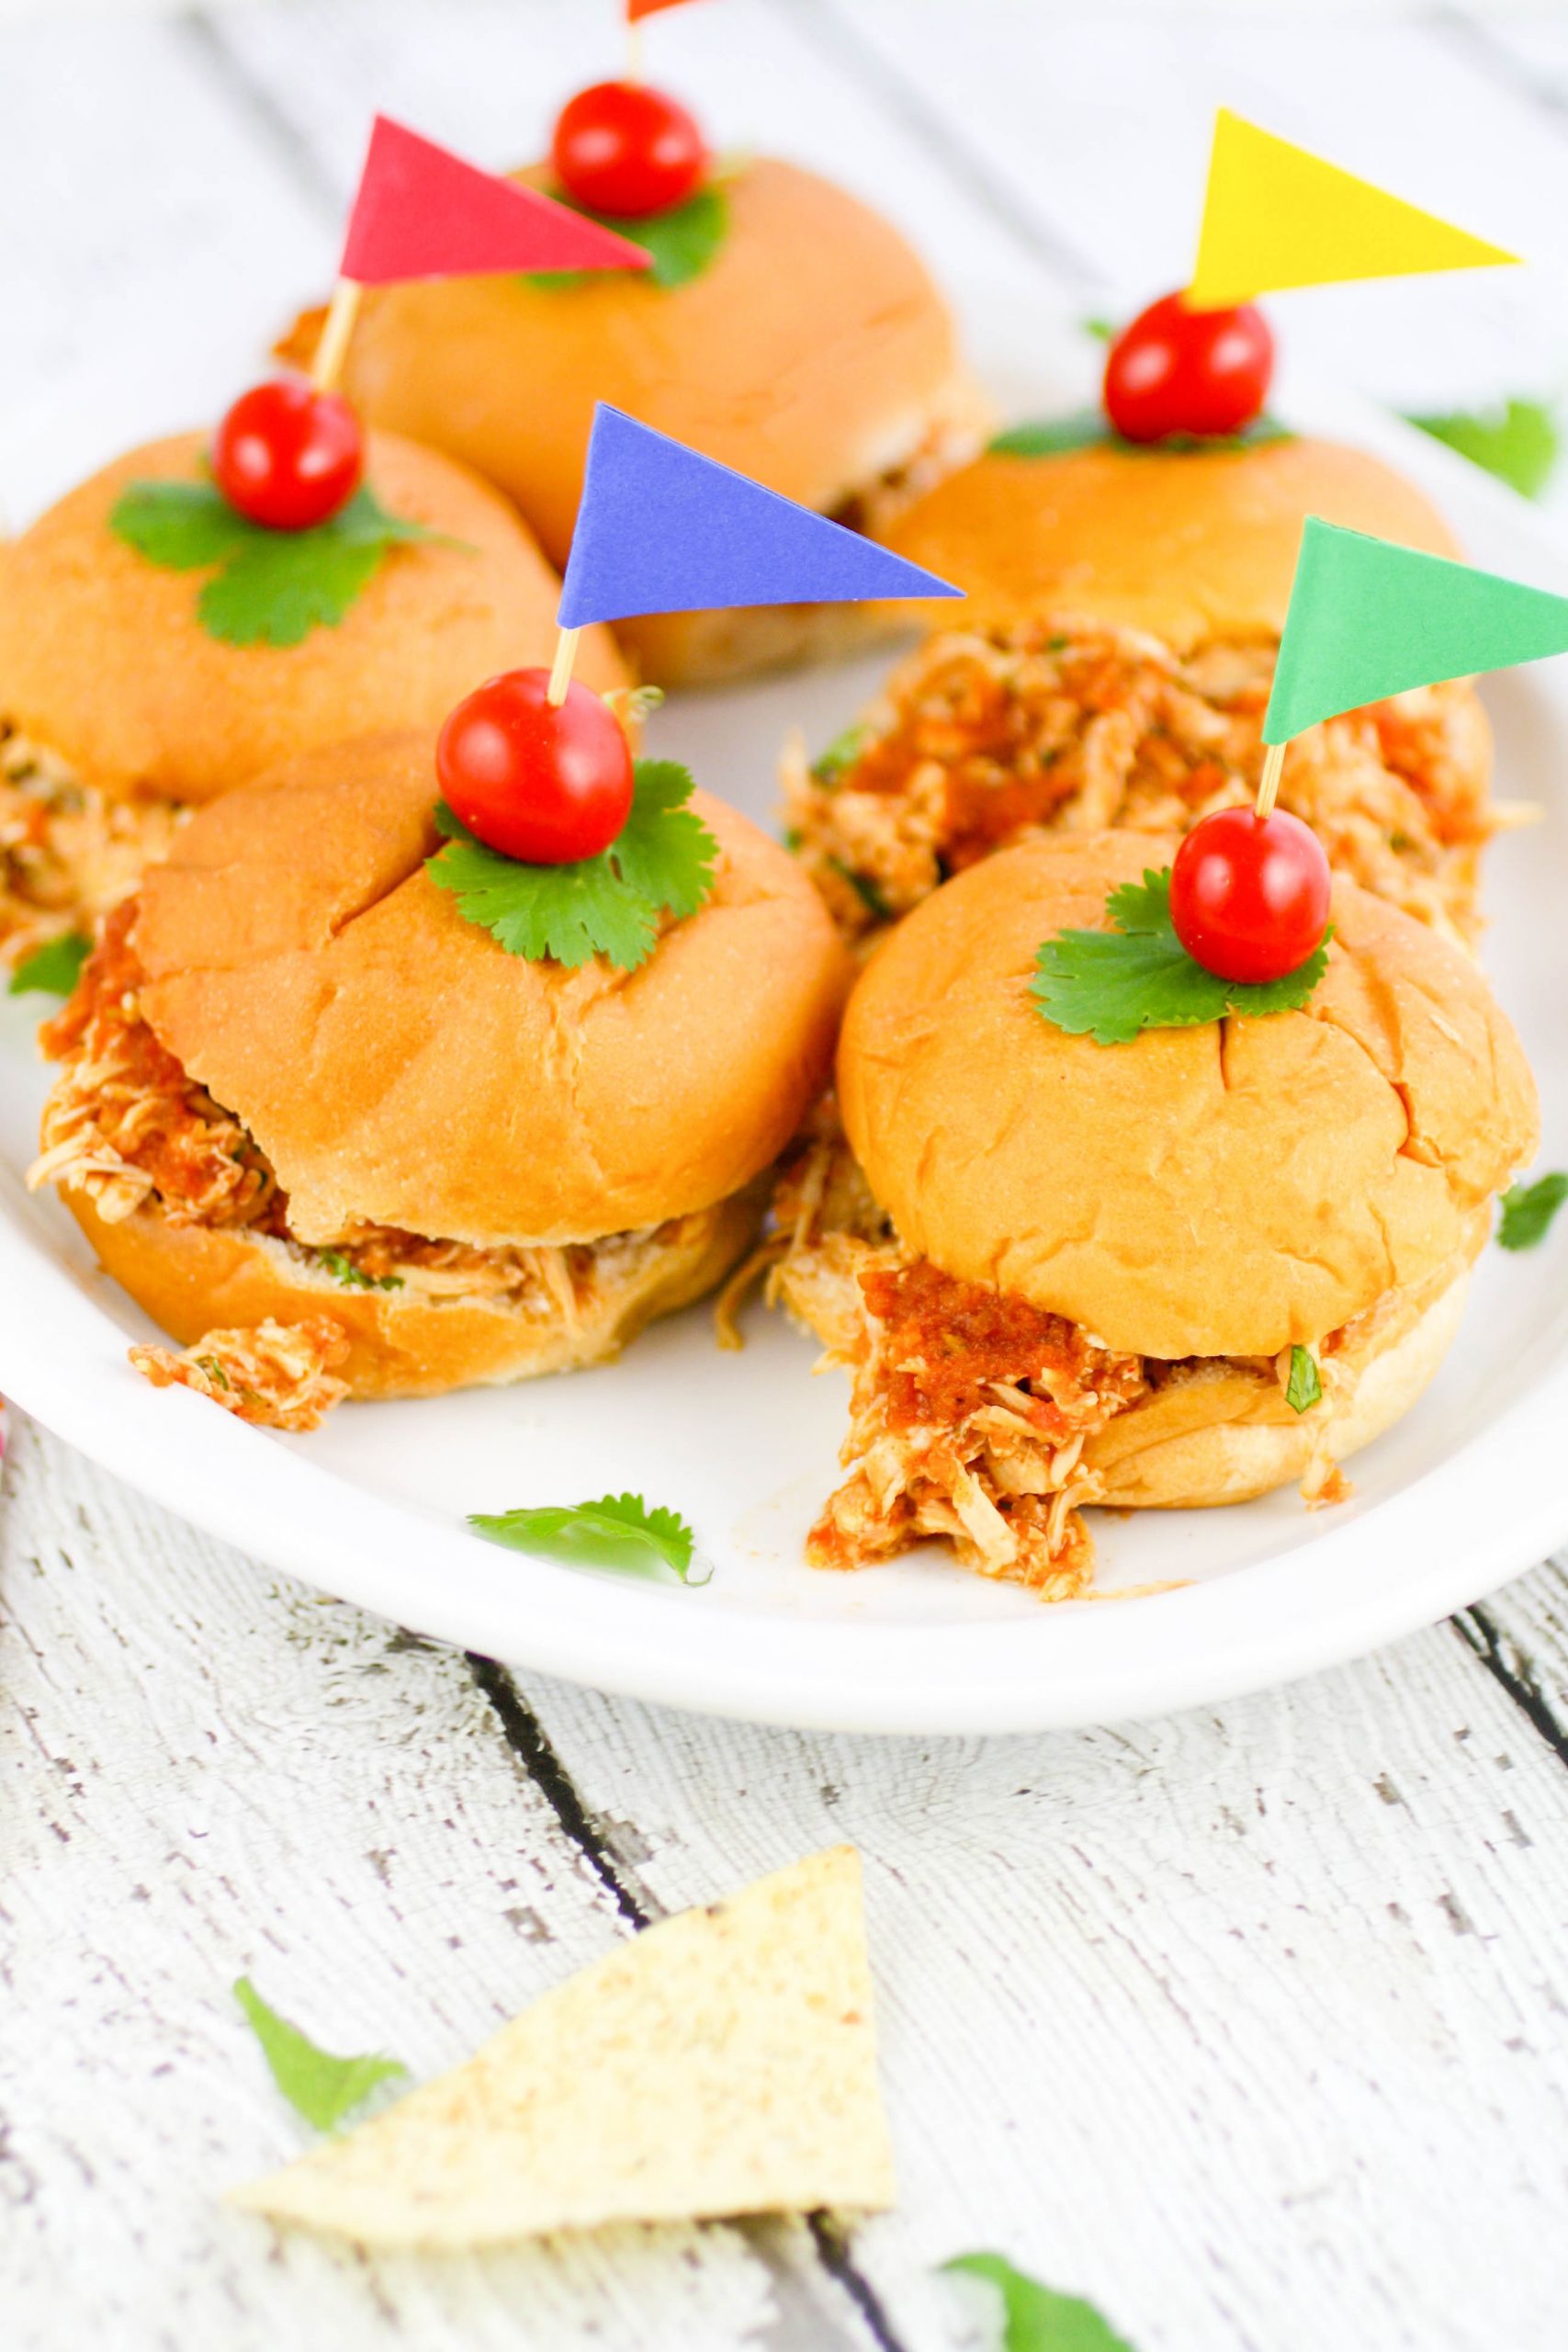 Slow Cooker Pulled Chicken Sandwiches
 Slow Cooker Southwestern Pulled Chicken Sandwiches